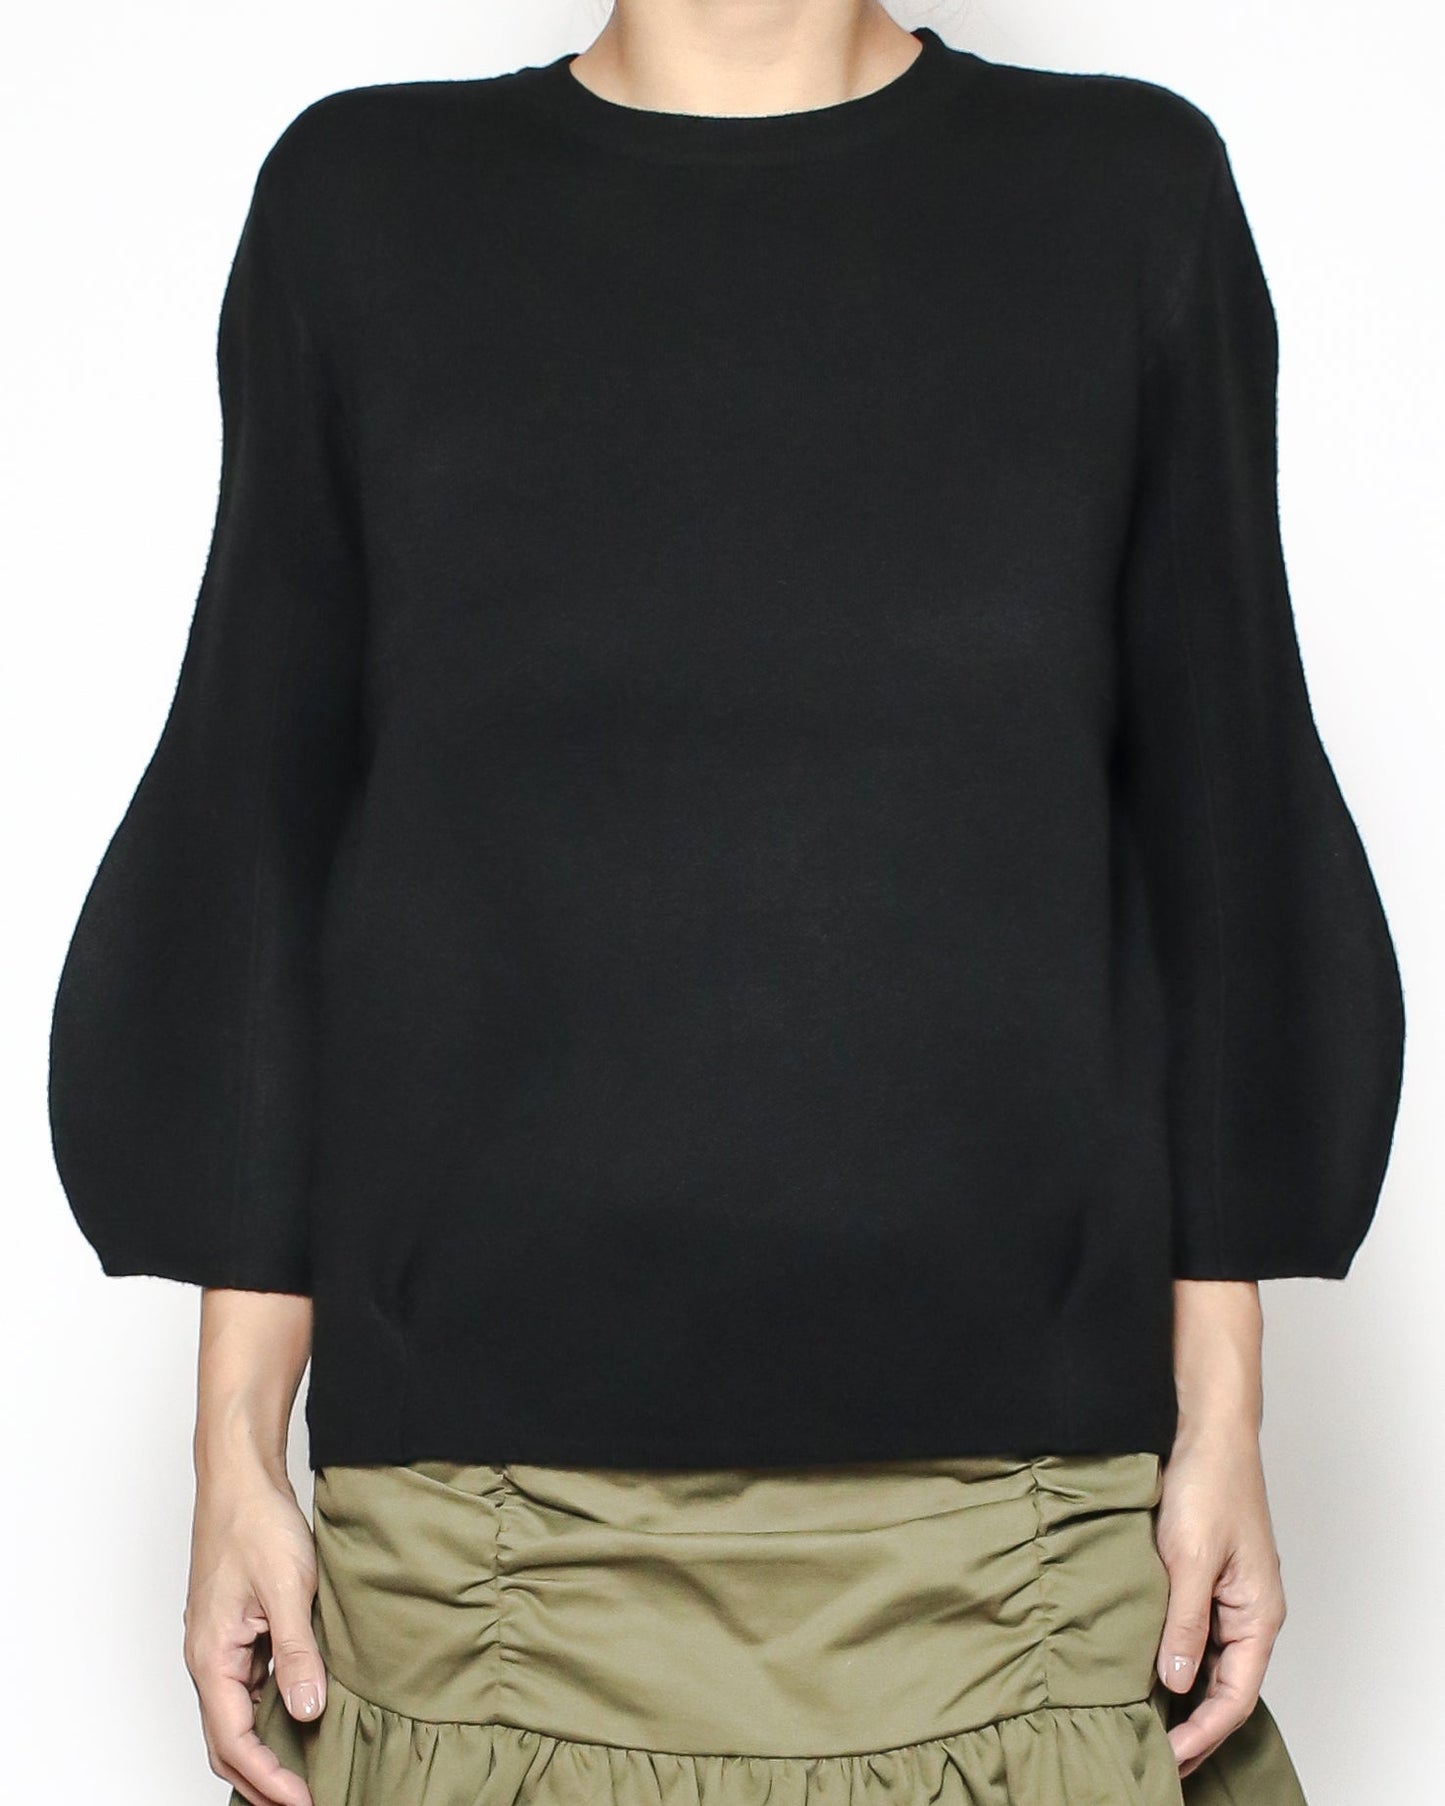 black balloon sleeves knitted top *pre-order*